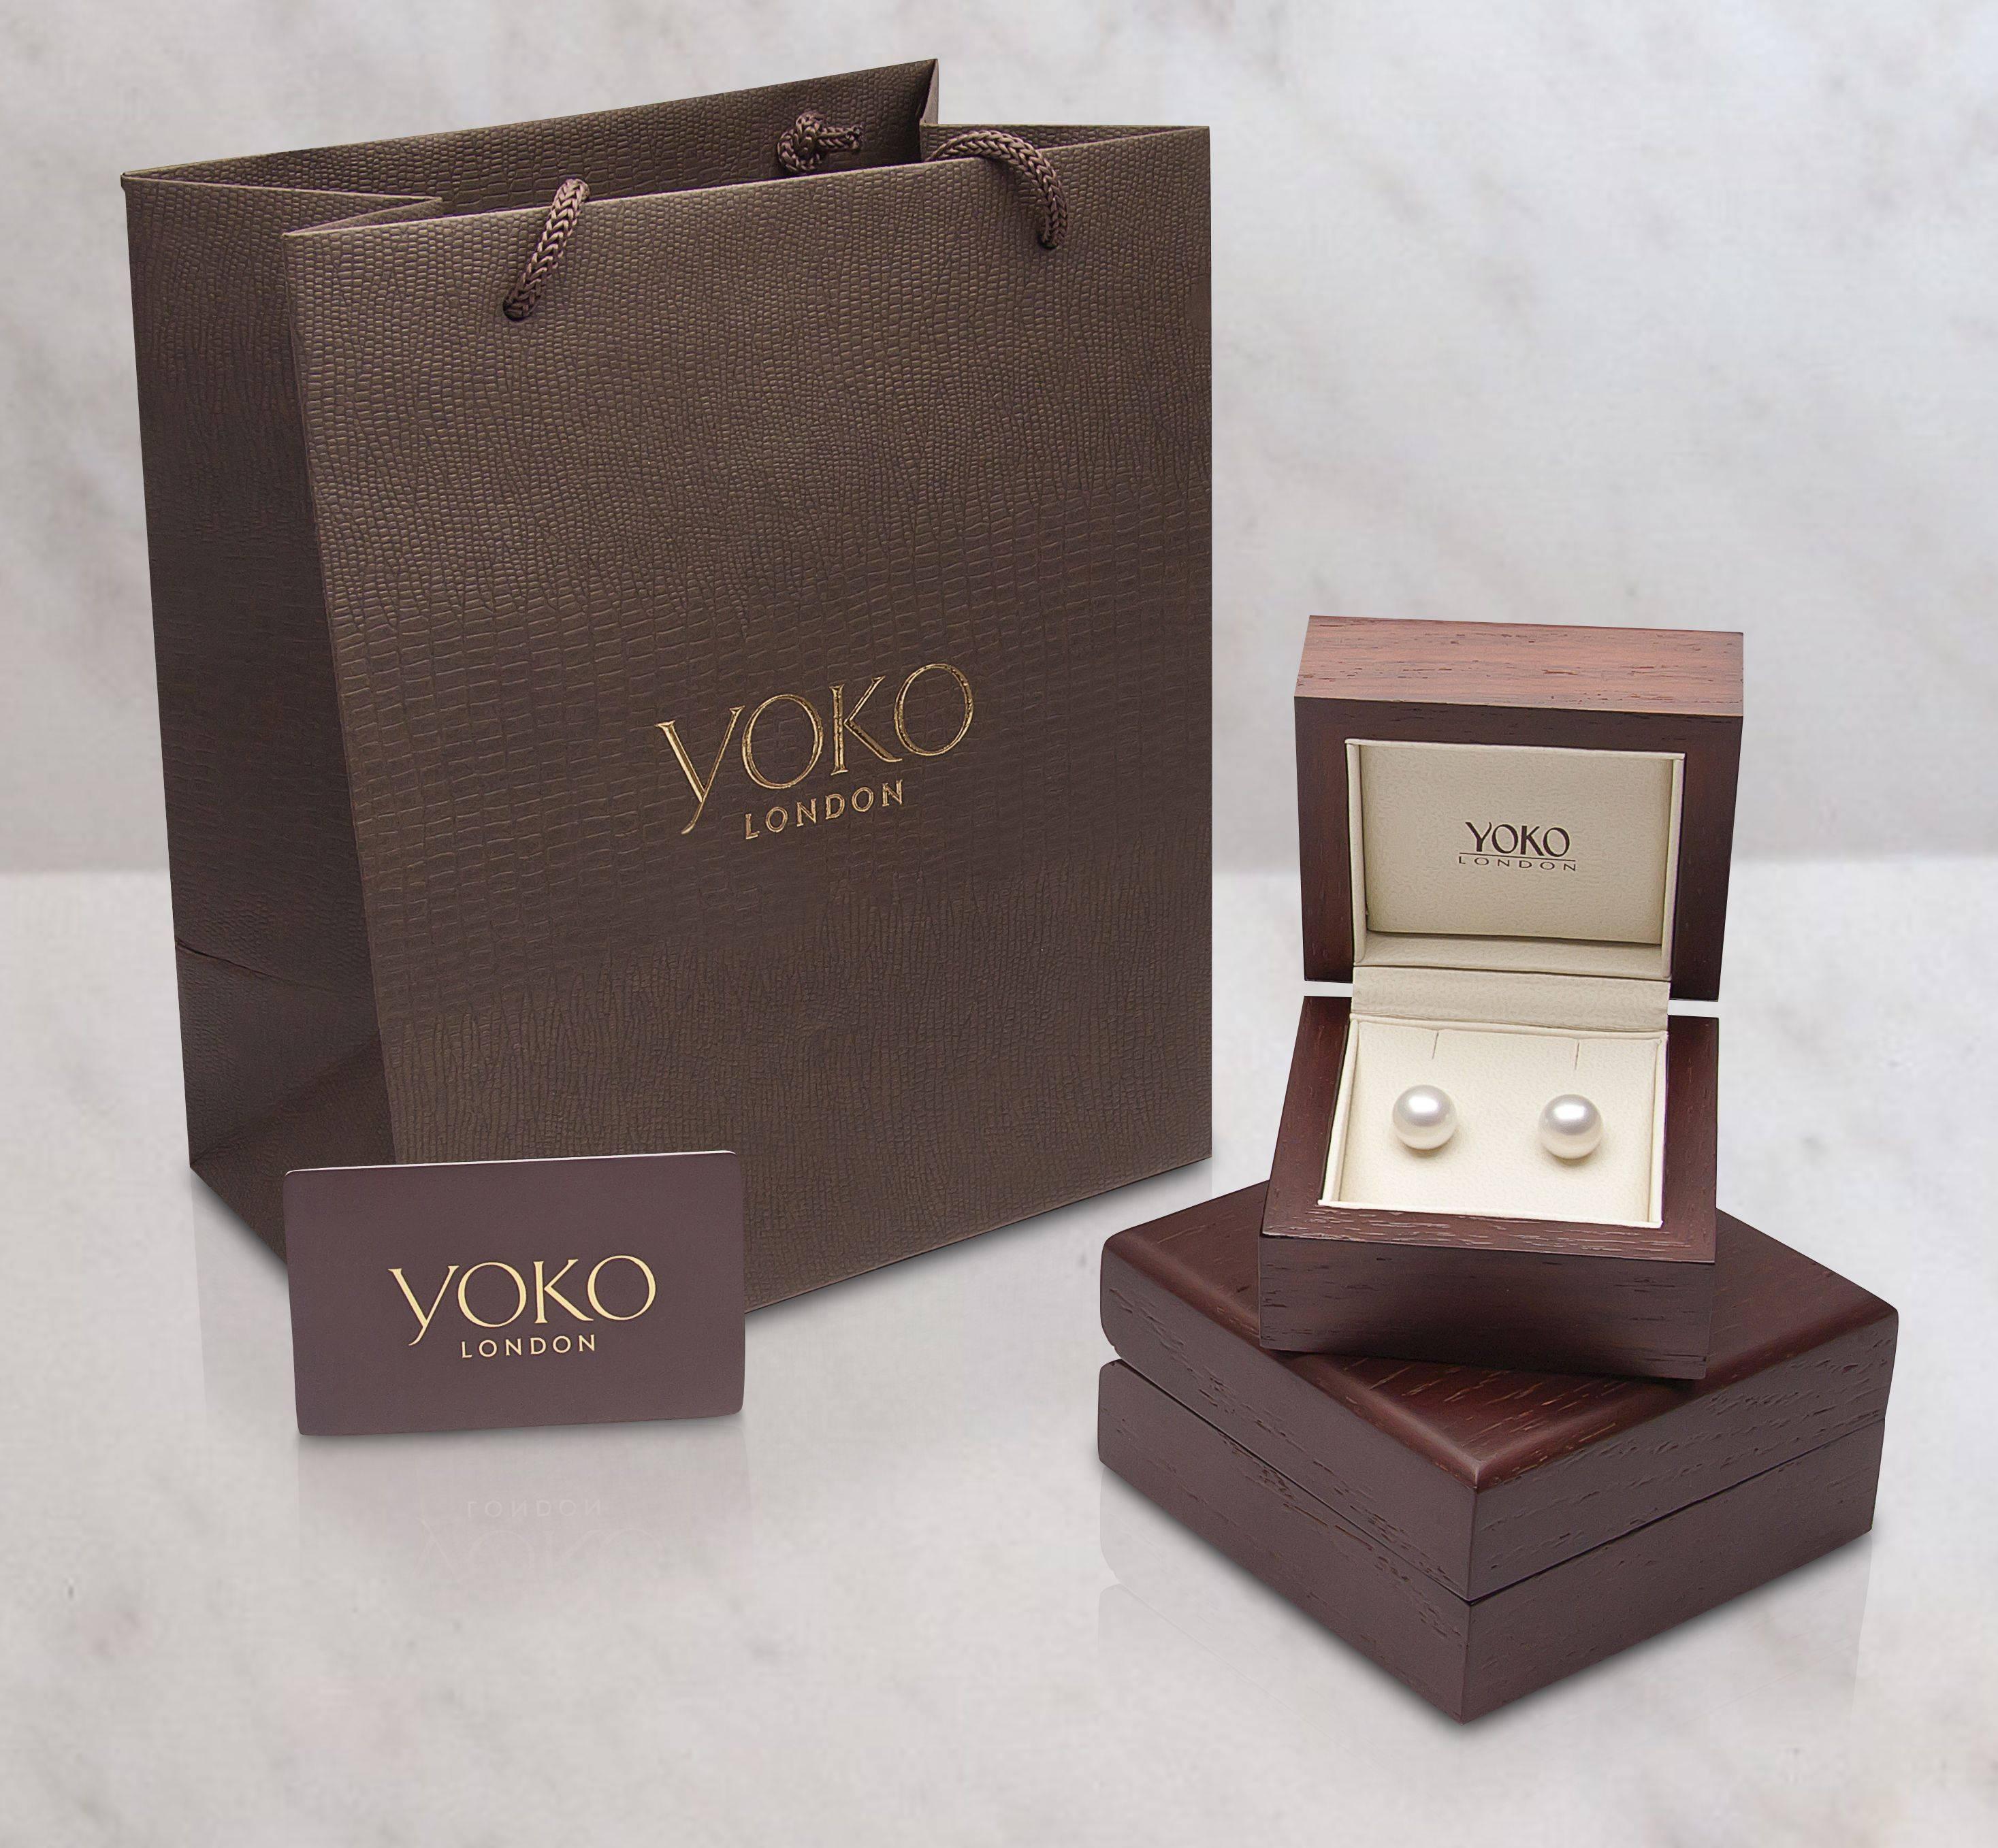 These stunning pearl earrings, in 18k white gold, from Yoko London are the height of sophistication and are the ultimate classic. Created using the finest South Sea pearls, chosen for their size, colour and lustre, wear these earrings with any